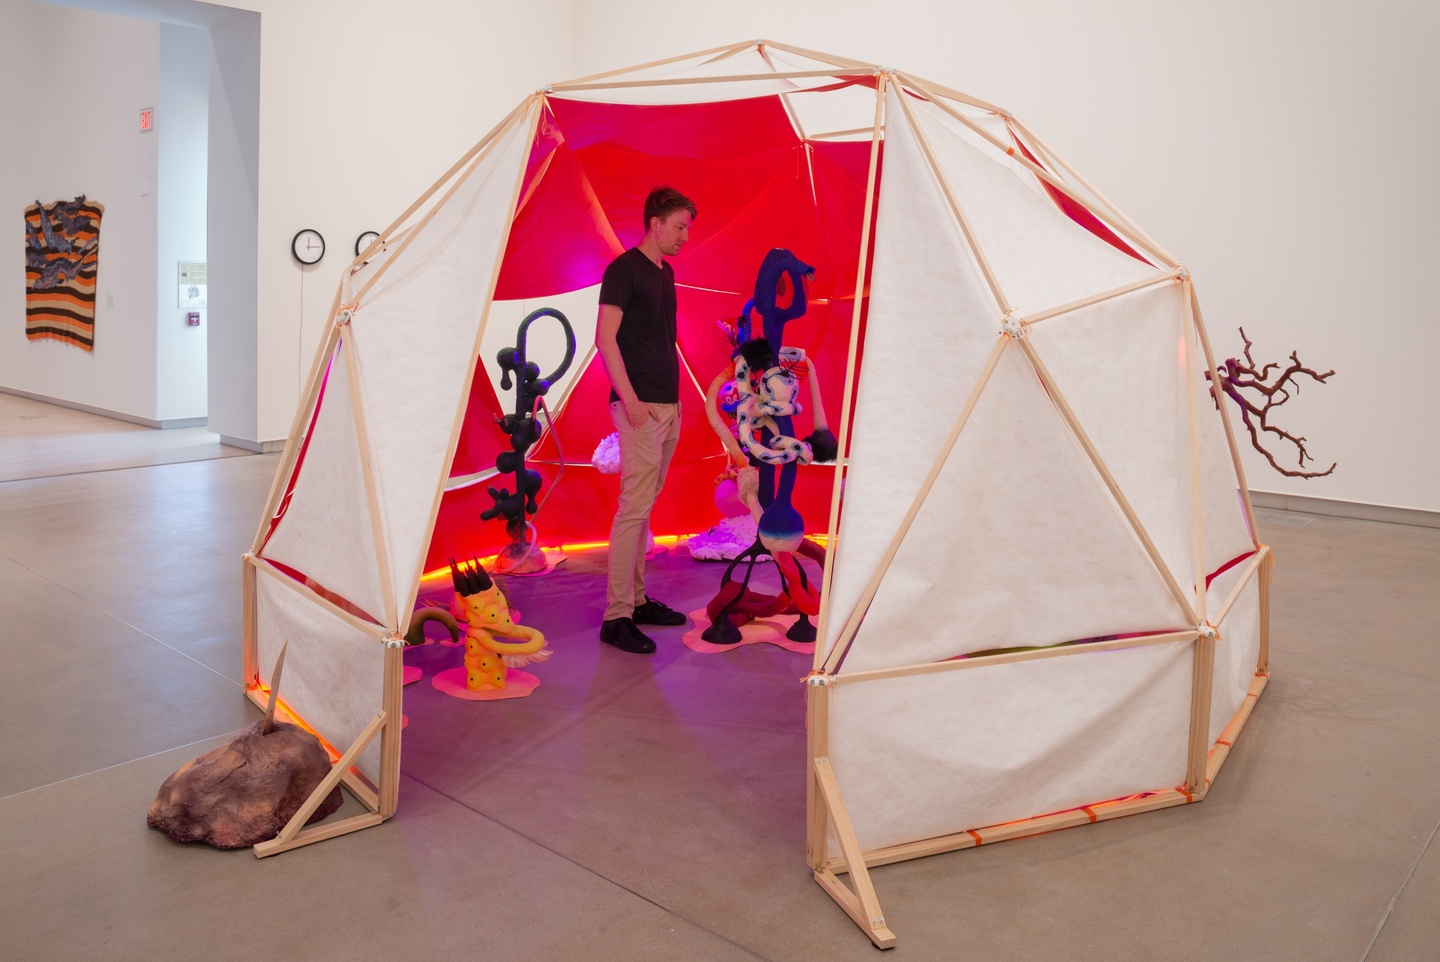 Outside view of a dome-shaped tent. The insides of the bright pink tent with its multiple sculptures is visible